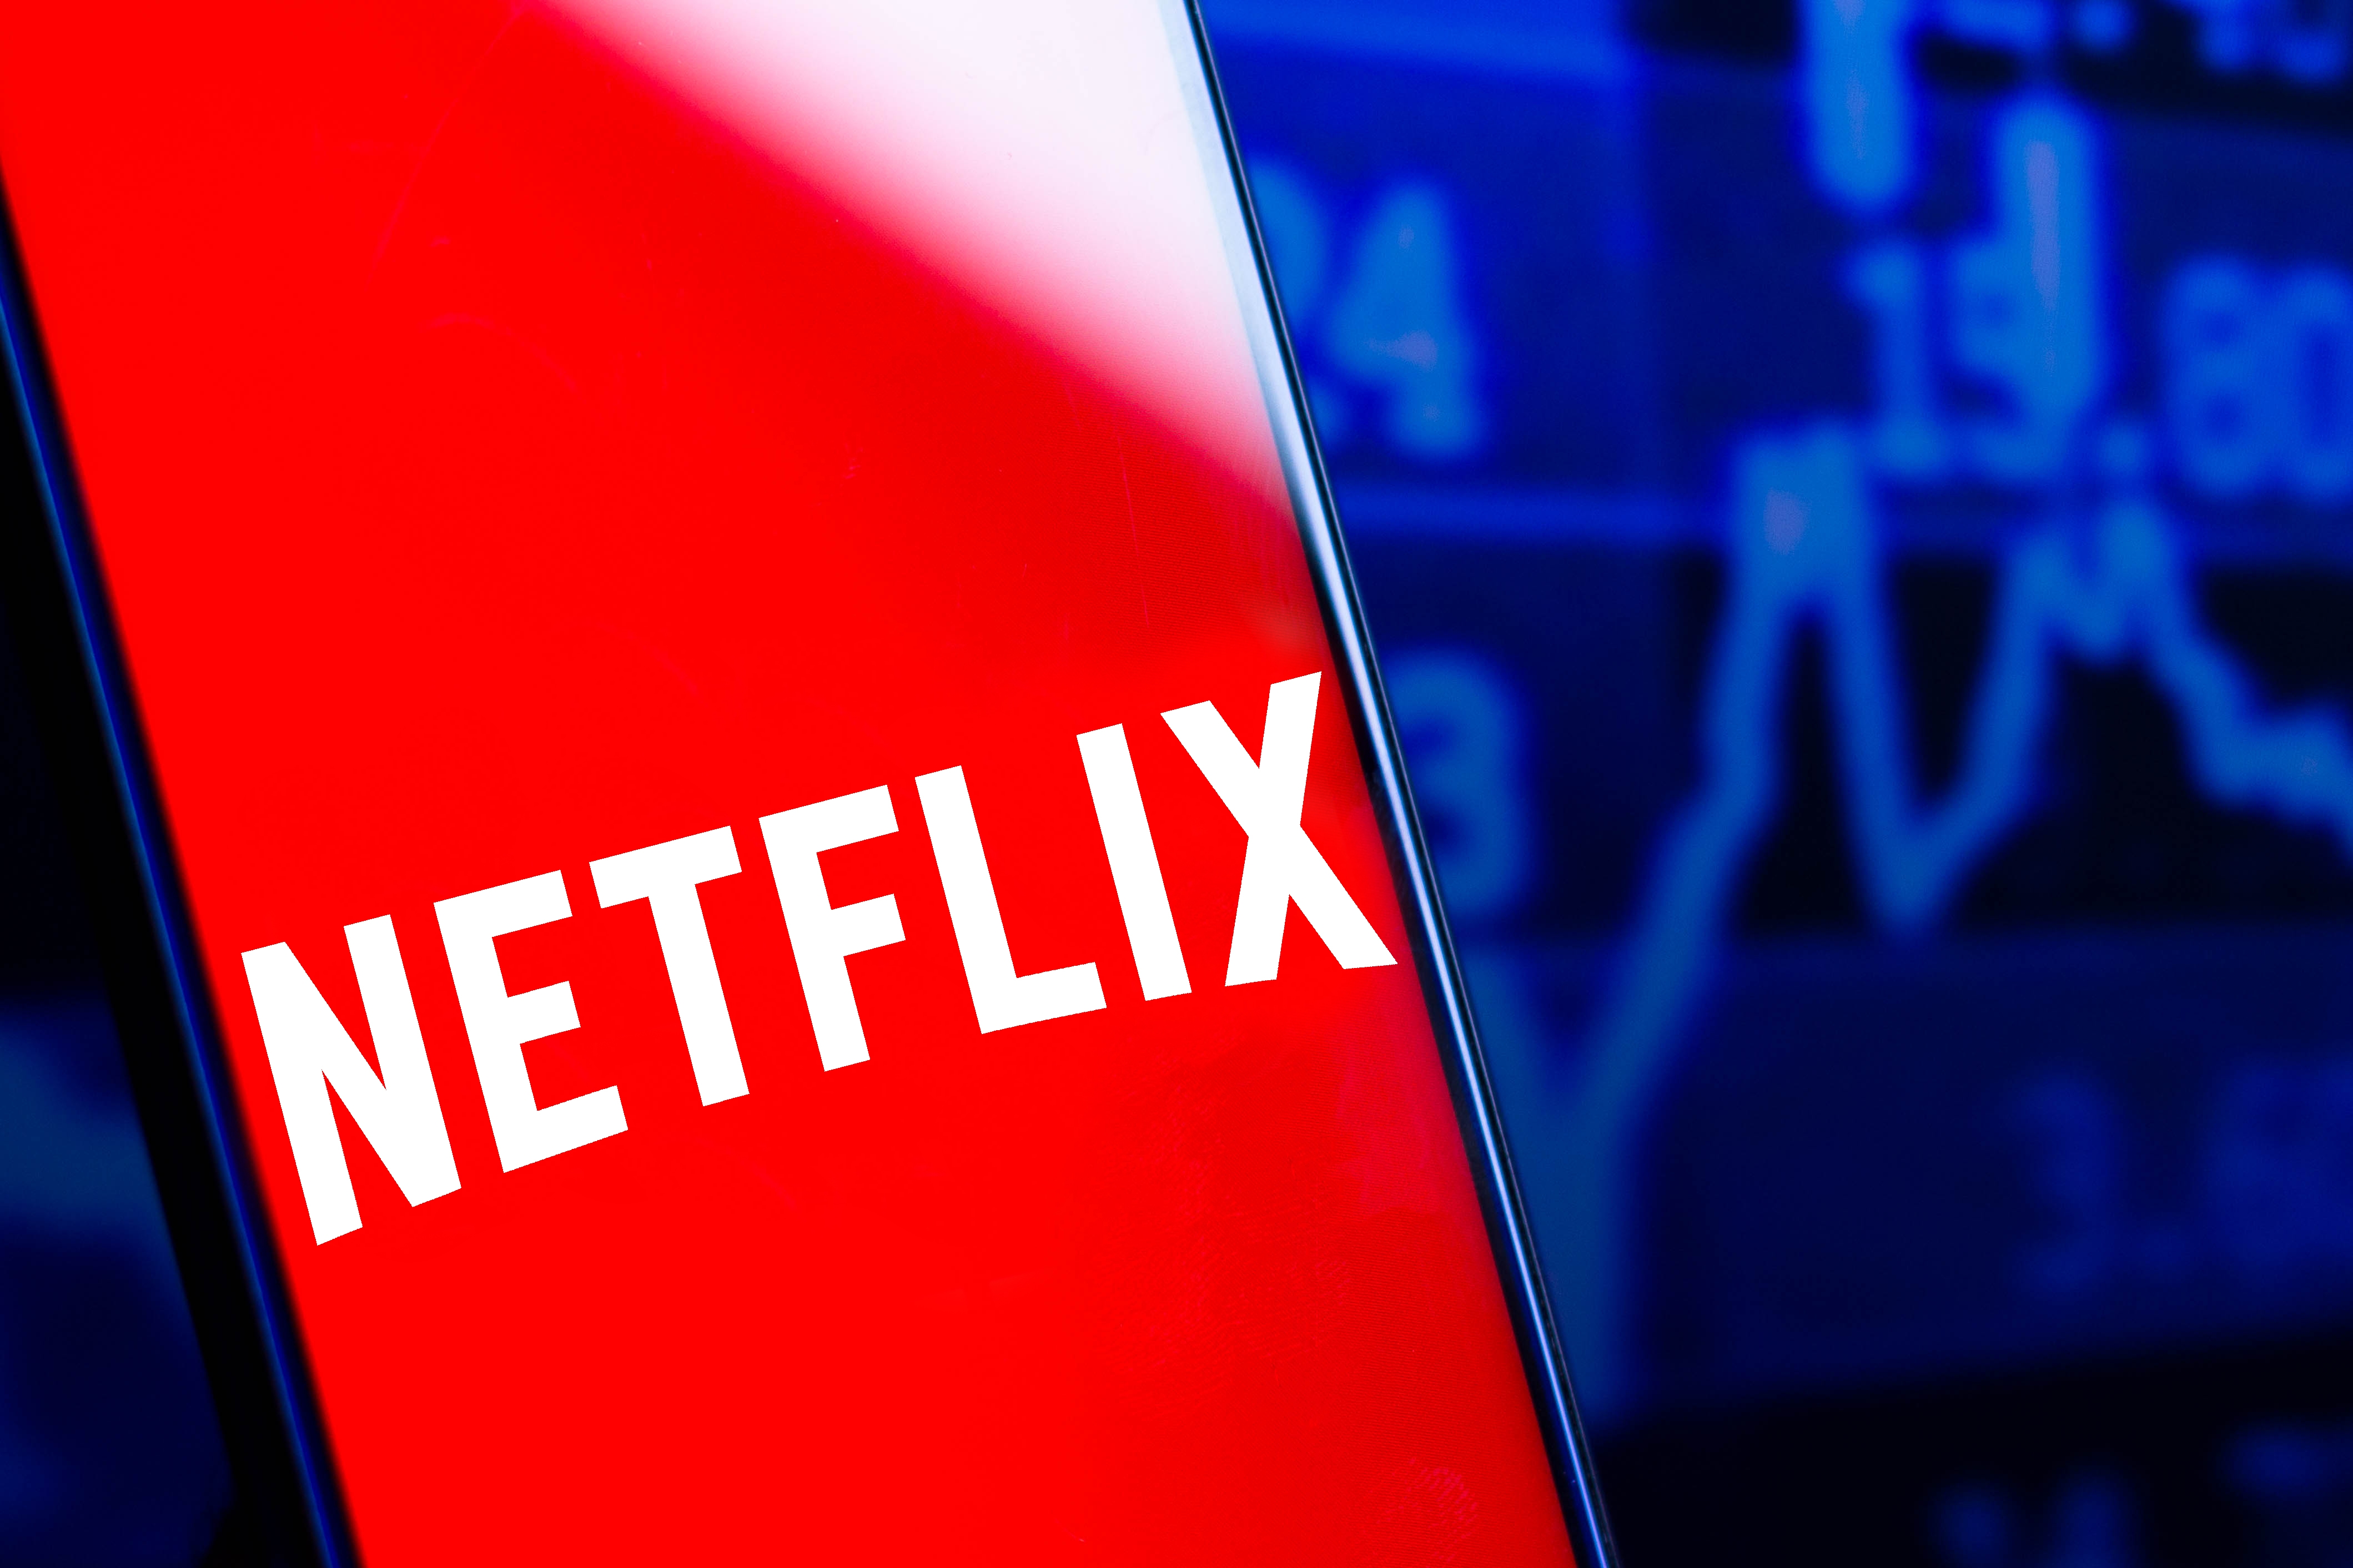 $NFLX crashed below $200: Is the slump over or the sell-off continue?